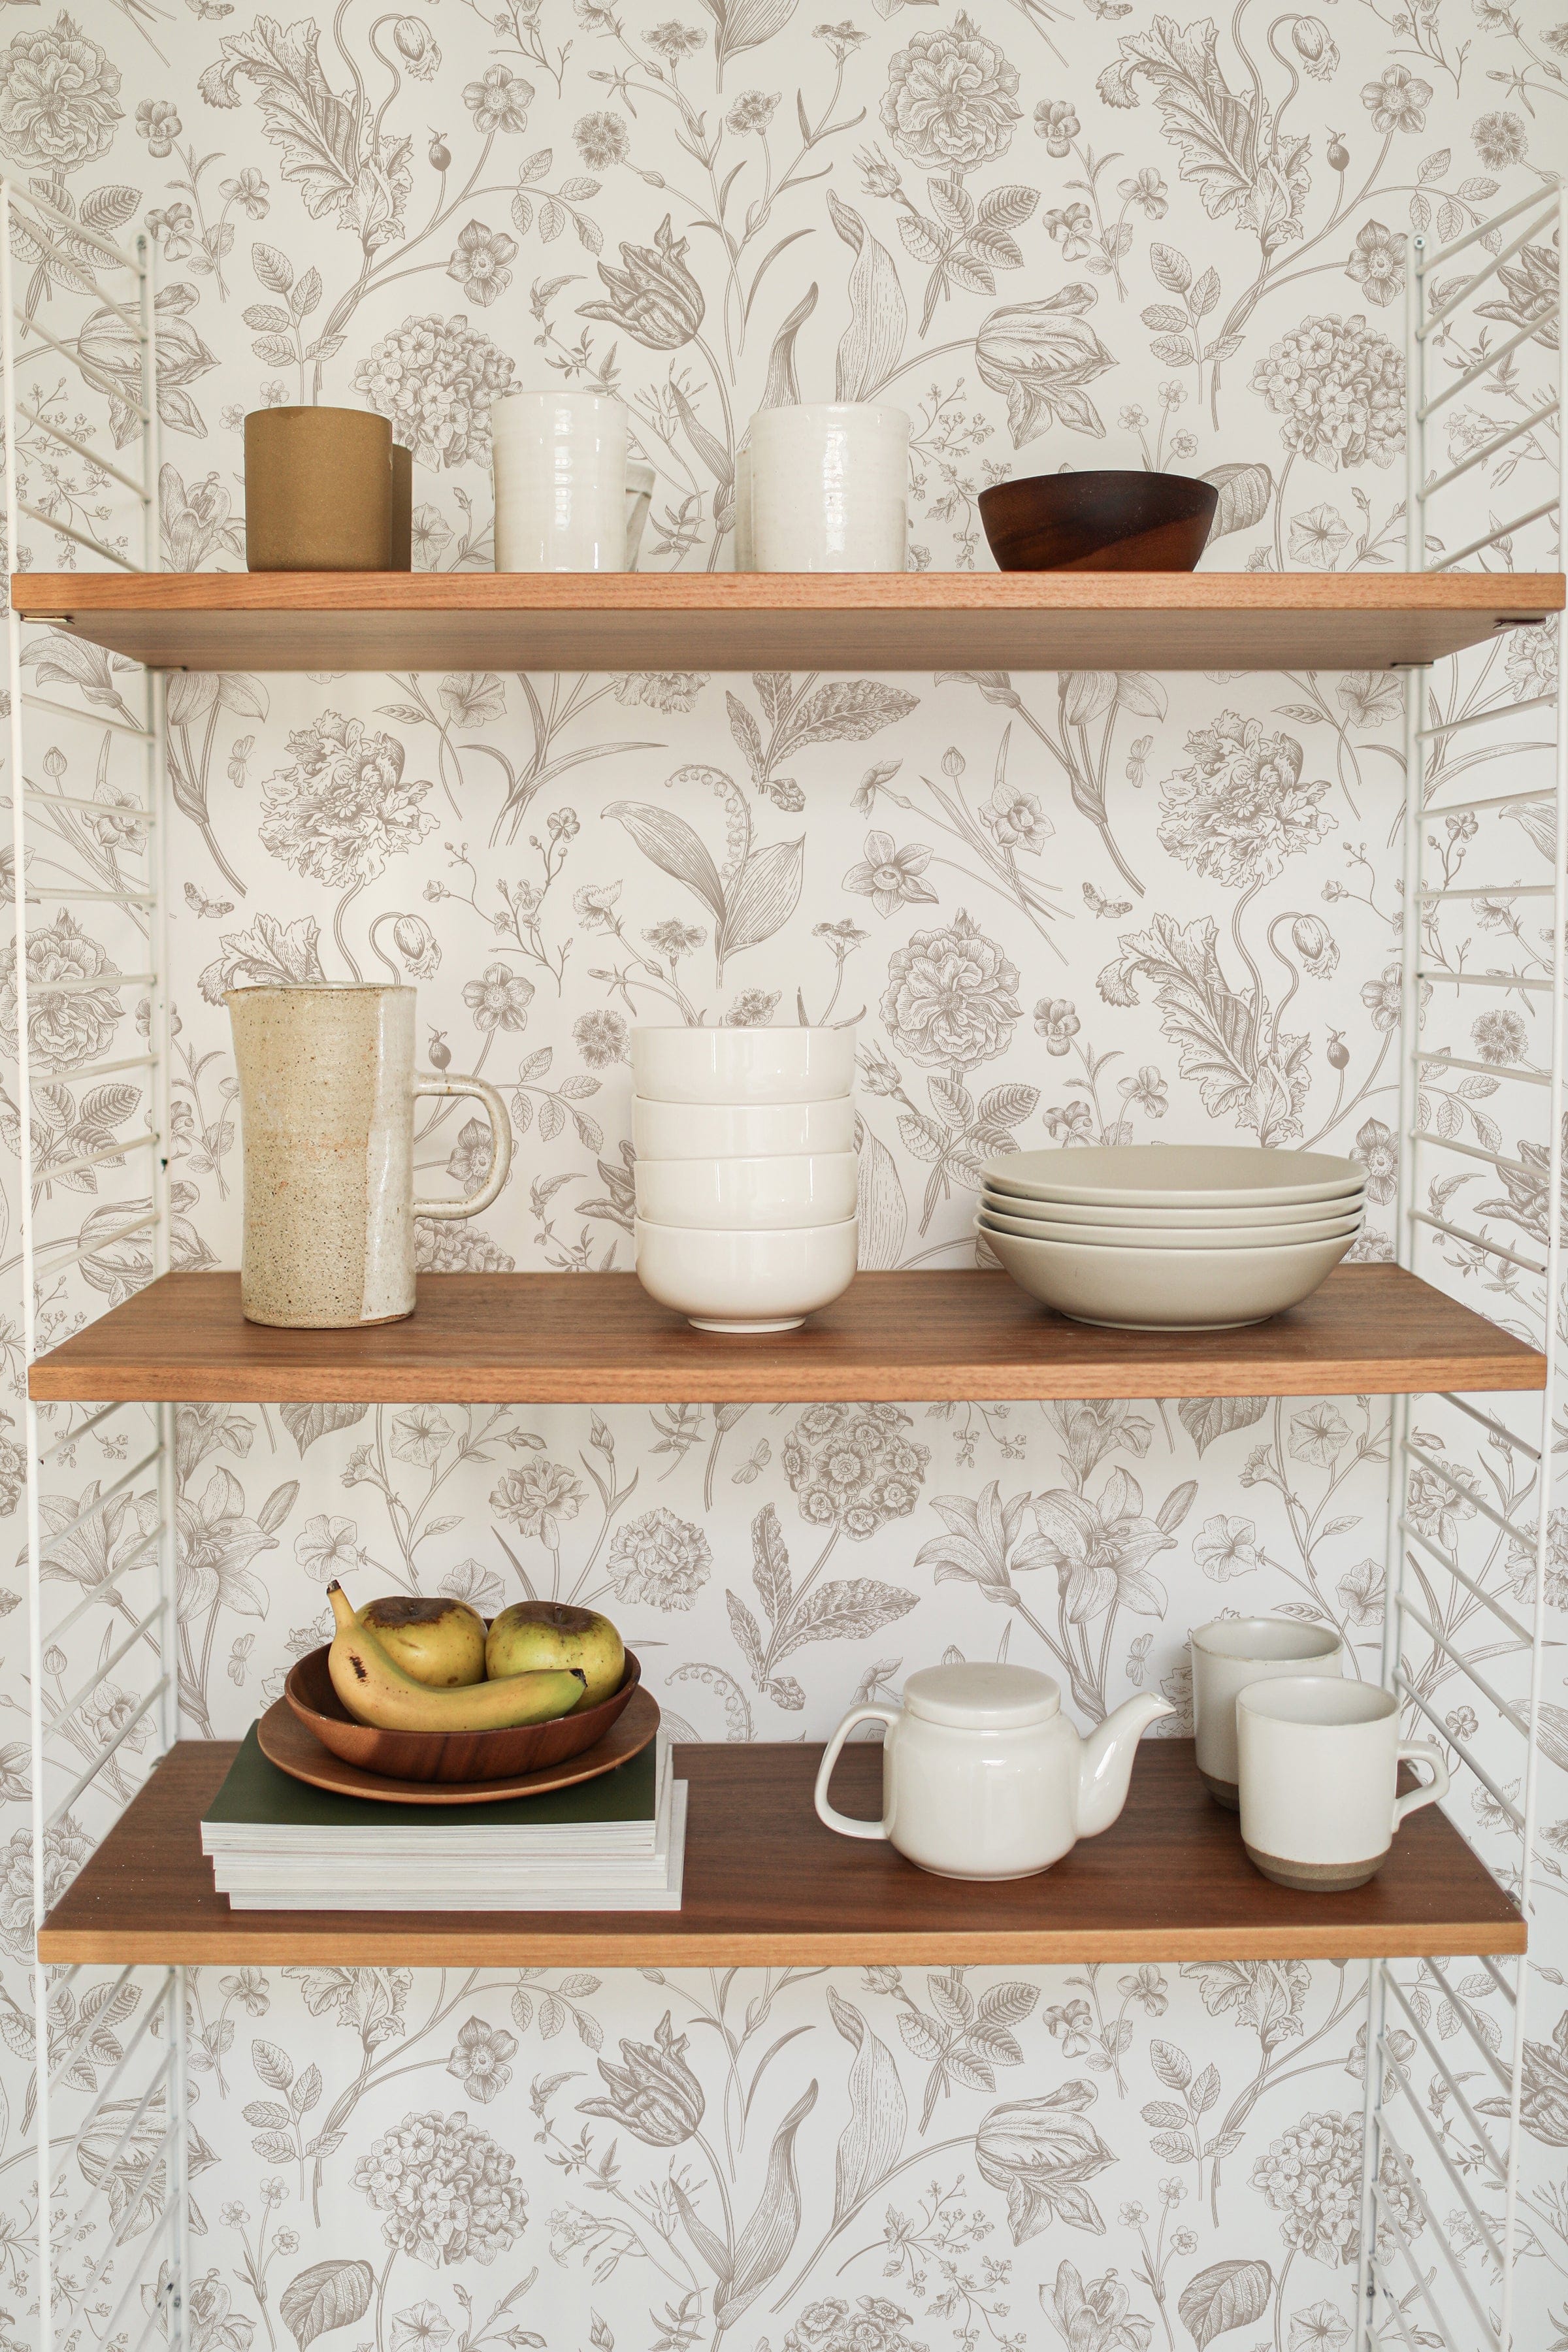 Open wooden shelves against a wall covered with Toile De Jouy Floral Wallpaper, which is adorned with delicate floral drawings. The shelves hold an array of kitchenware, adding a functional touch to the decorative space